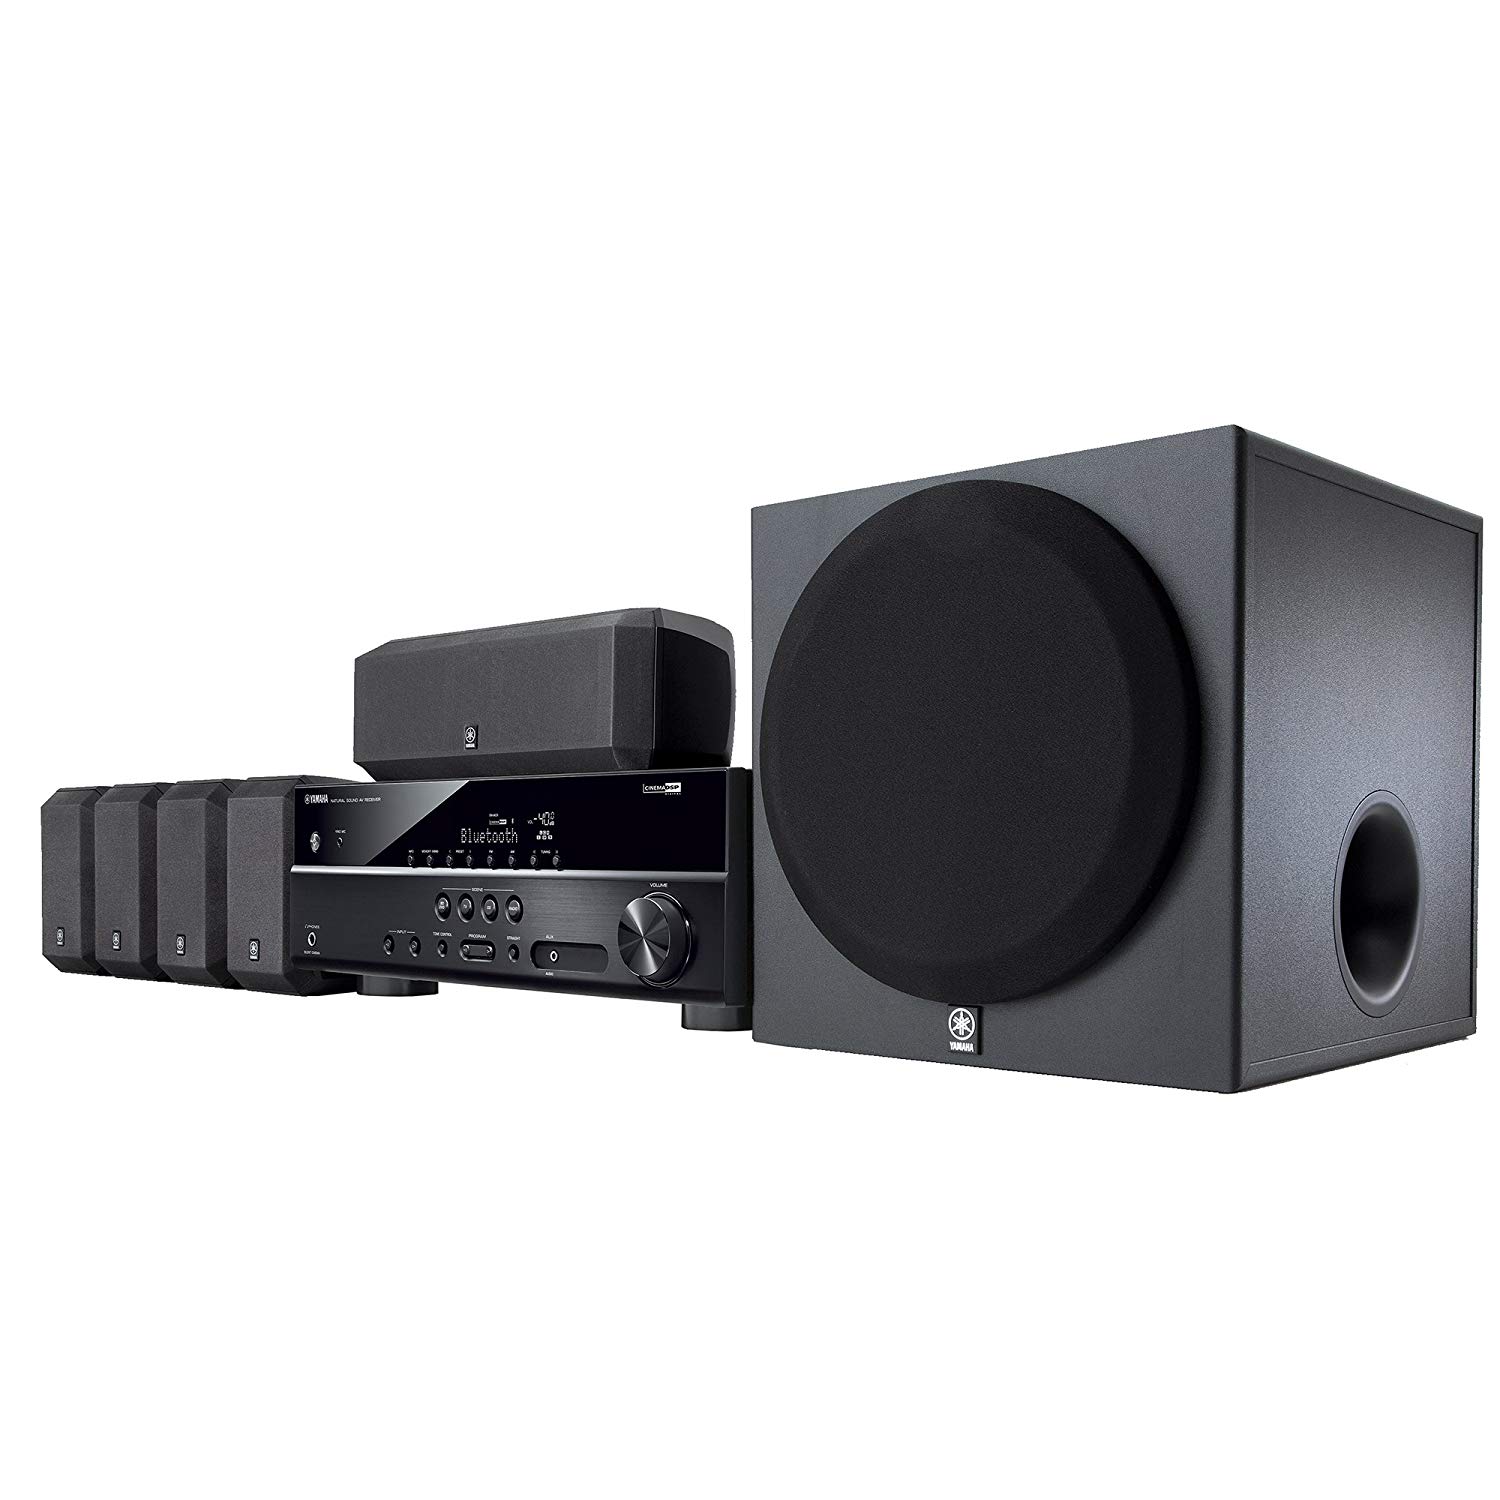 Yamaha YHT-3920UBL 5.1-Channel Home Theater in a Box System with Bluetooth